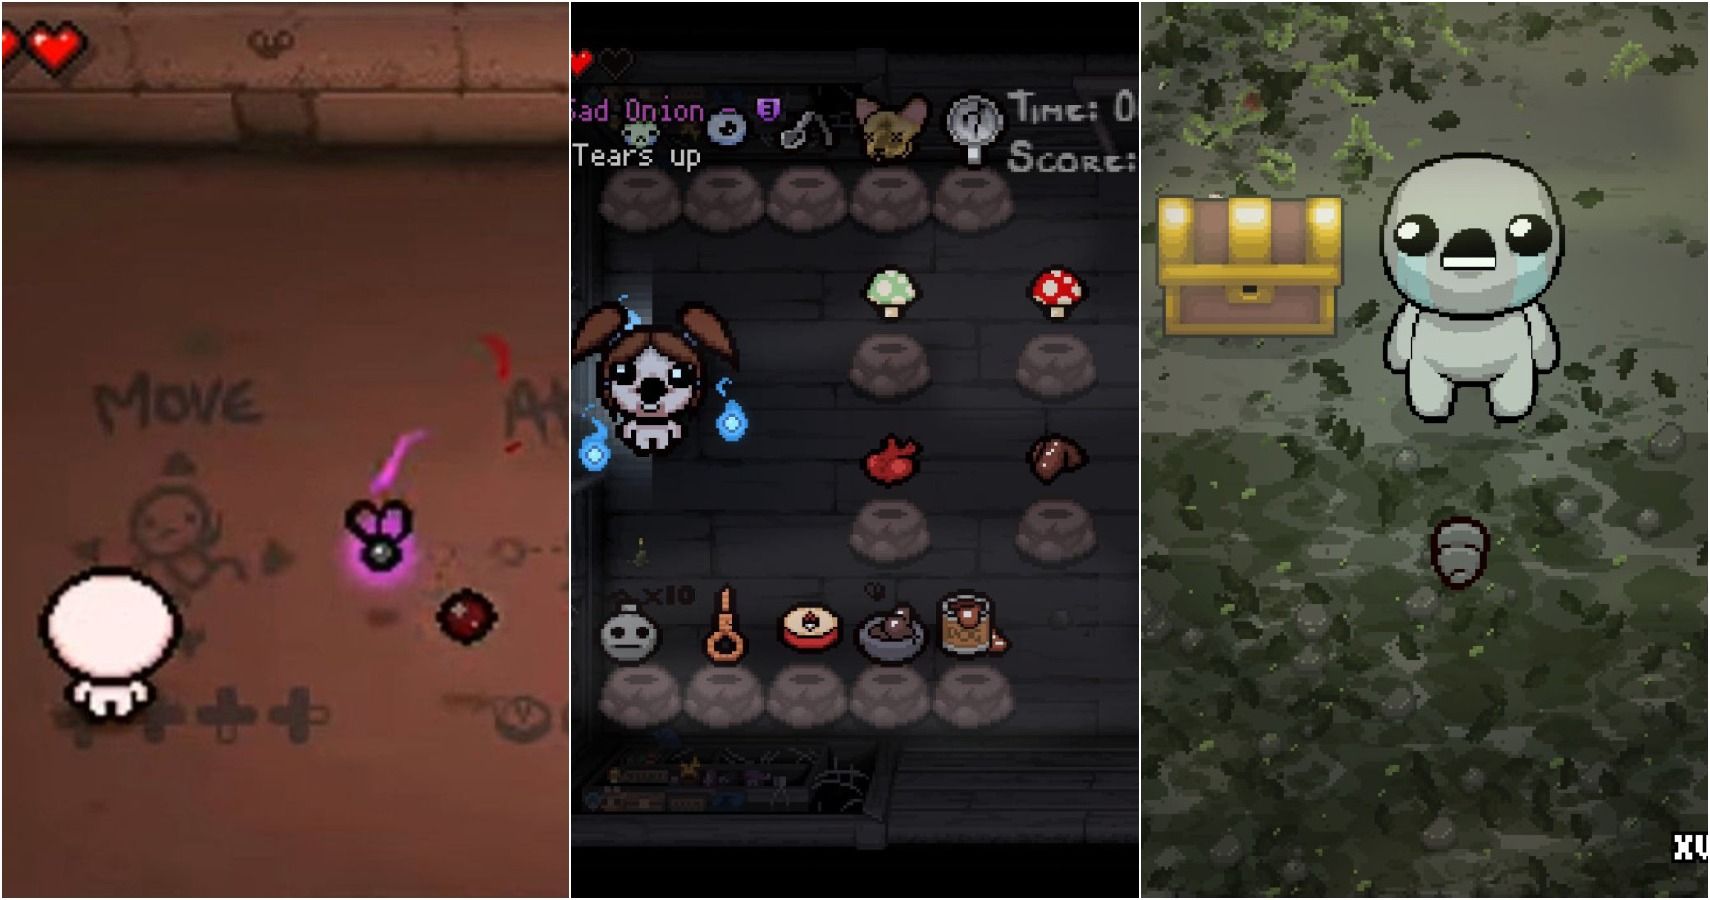 The Binding of Isaac: Repentance free instal